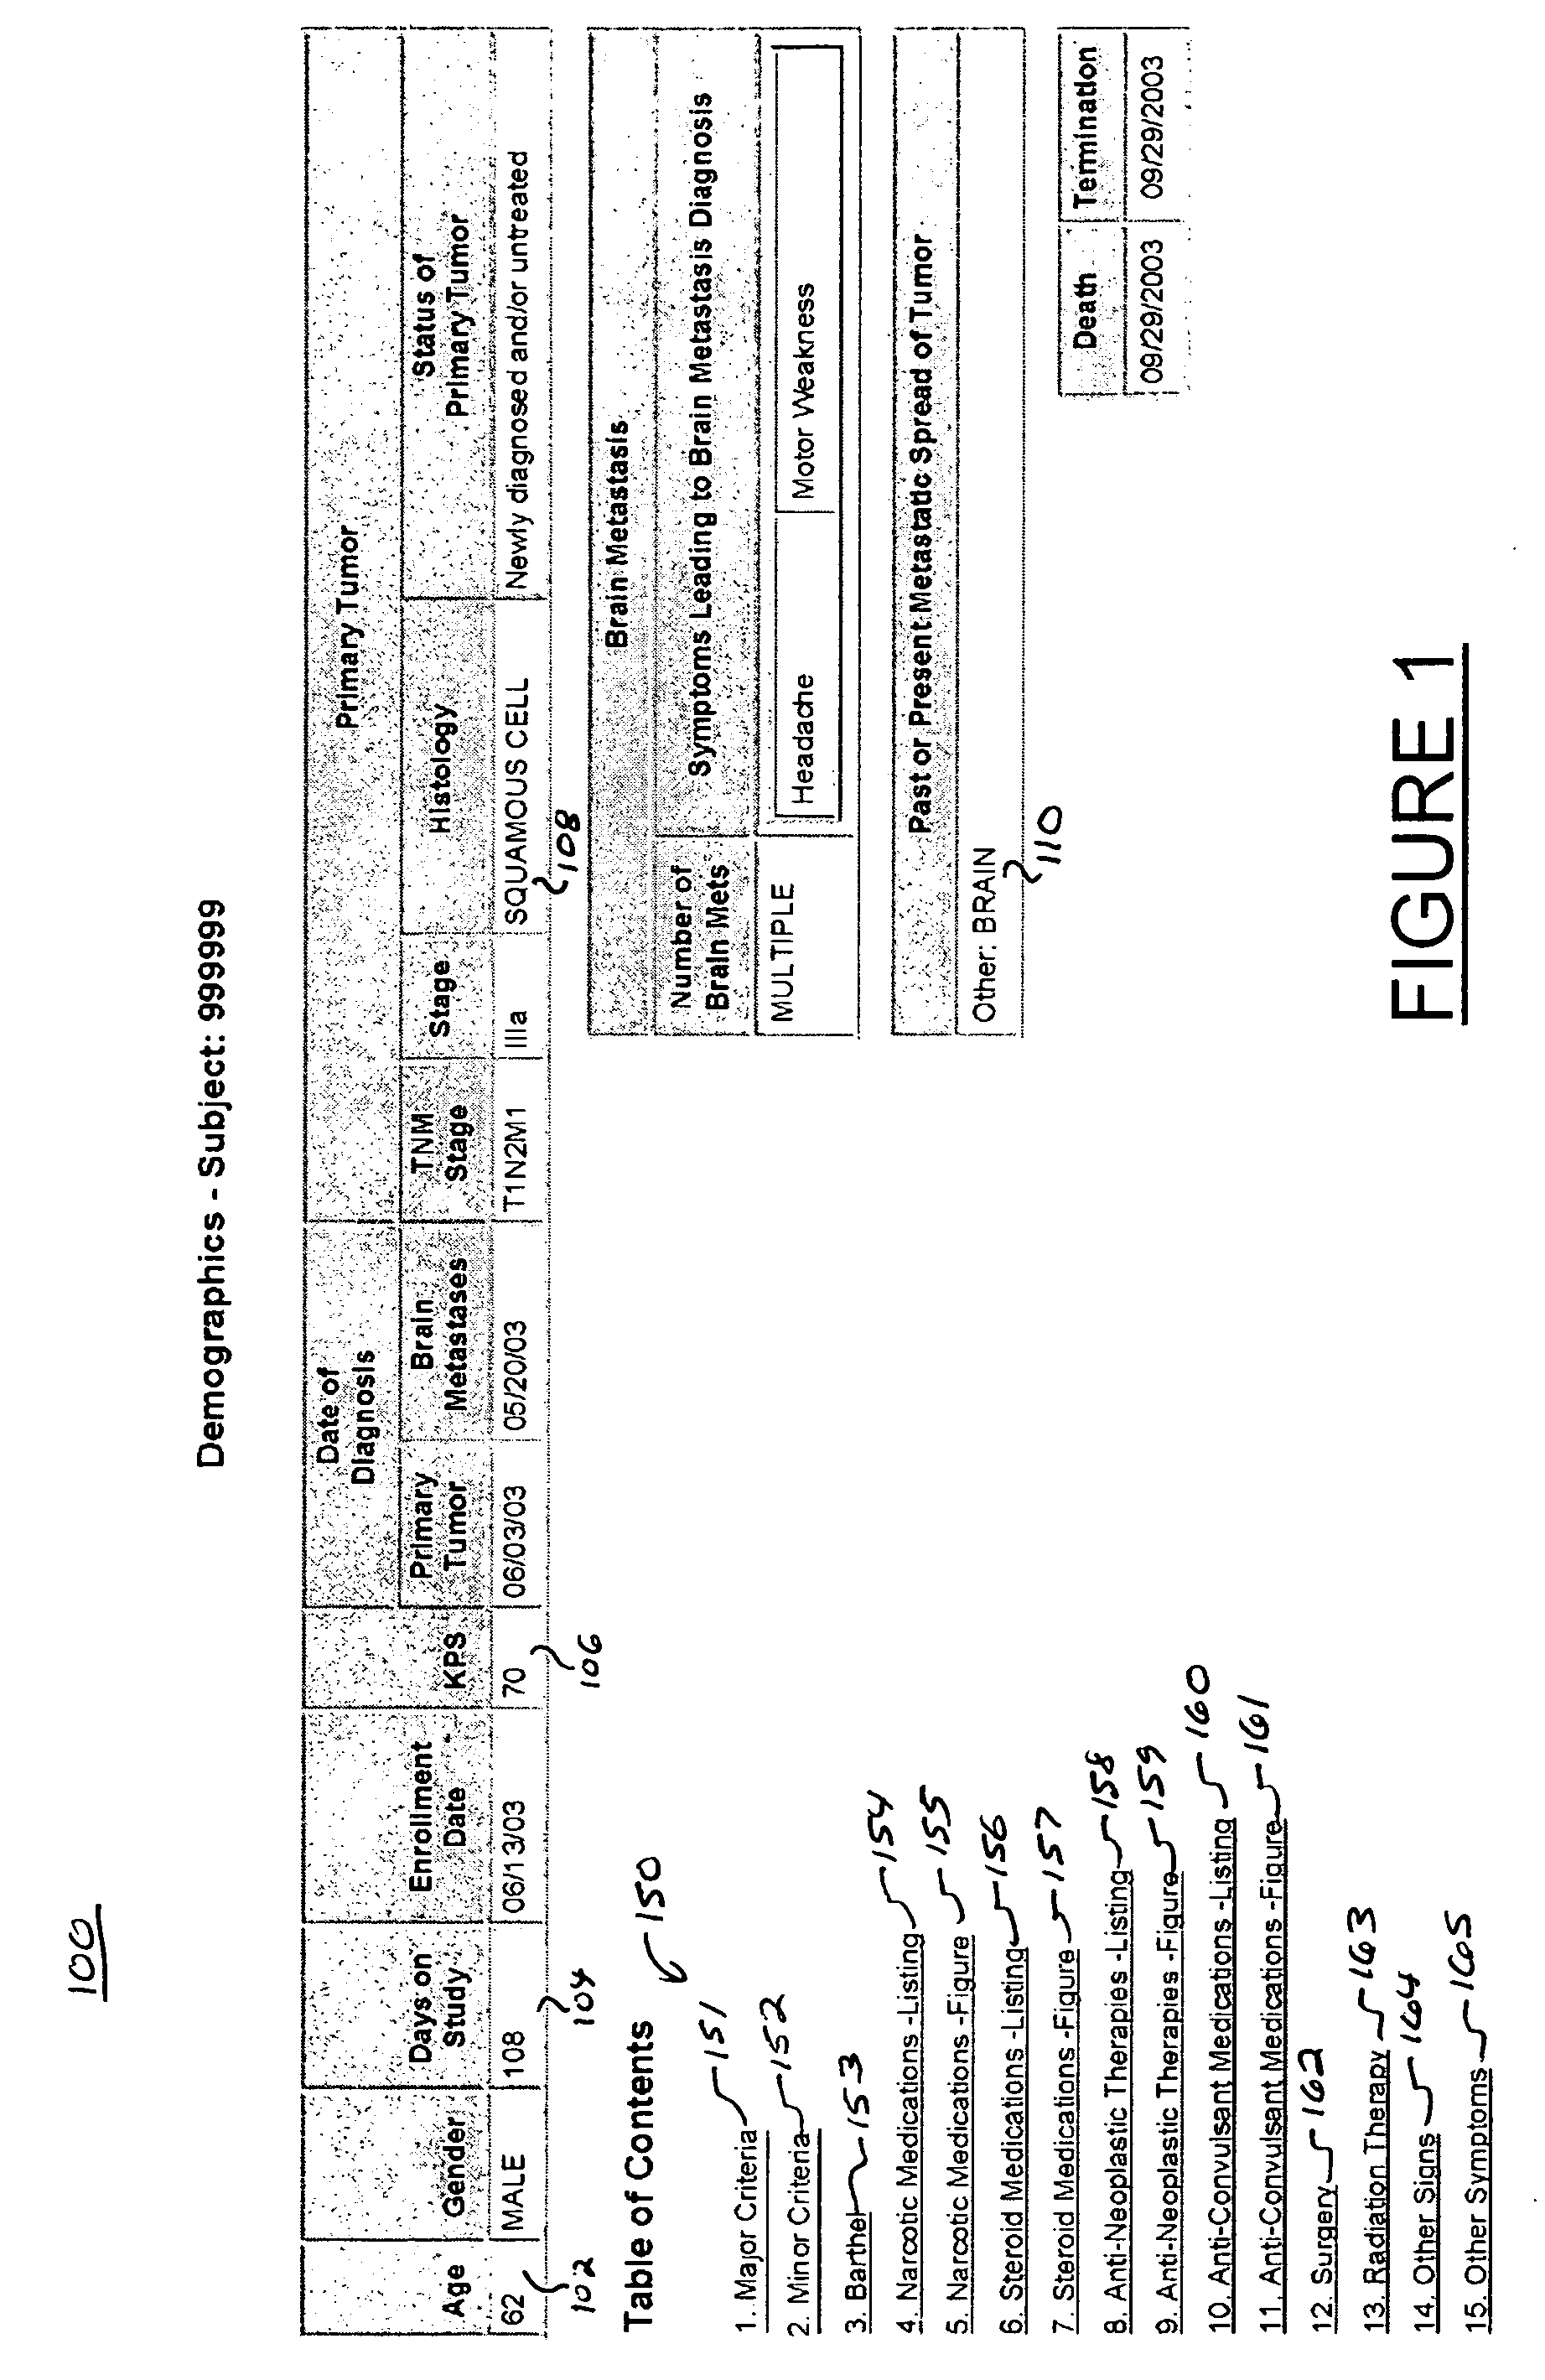 System and method for analysis of neurological condition